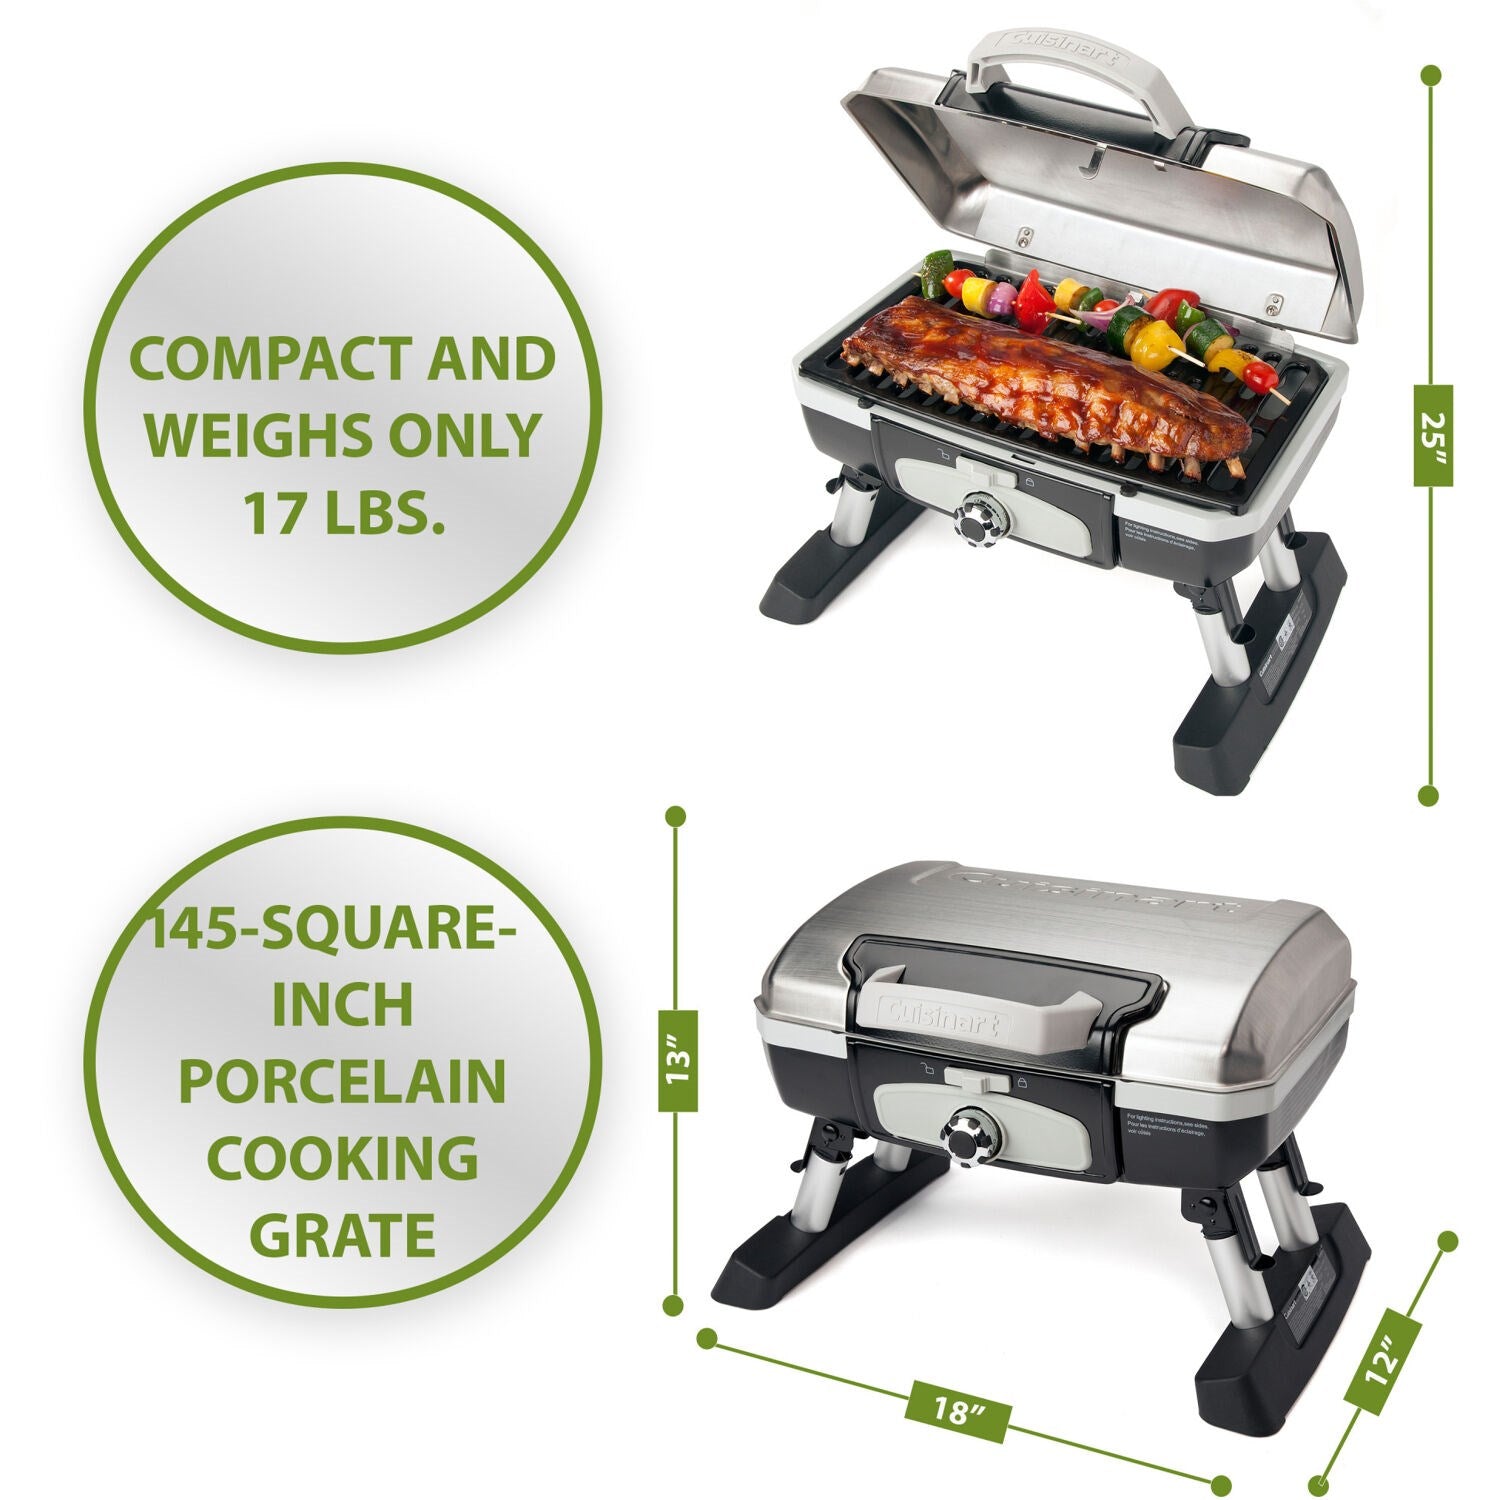 Cuisinart Petit Gourmet Portable Tabletop Outdoor LP Gas Grill in Silver/Black